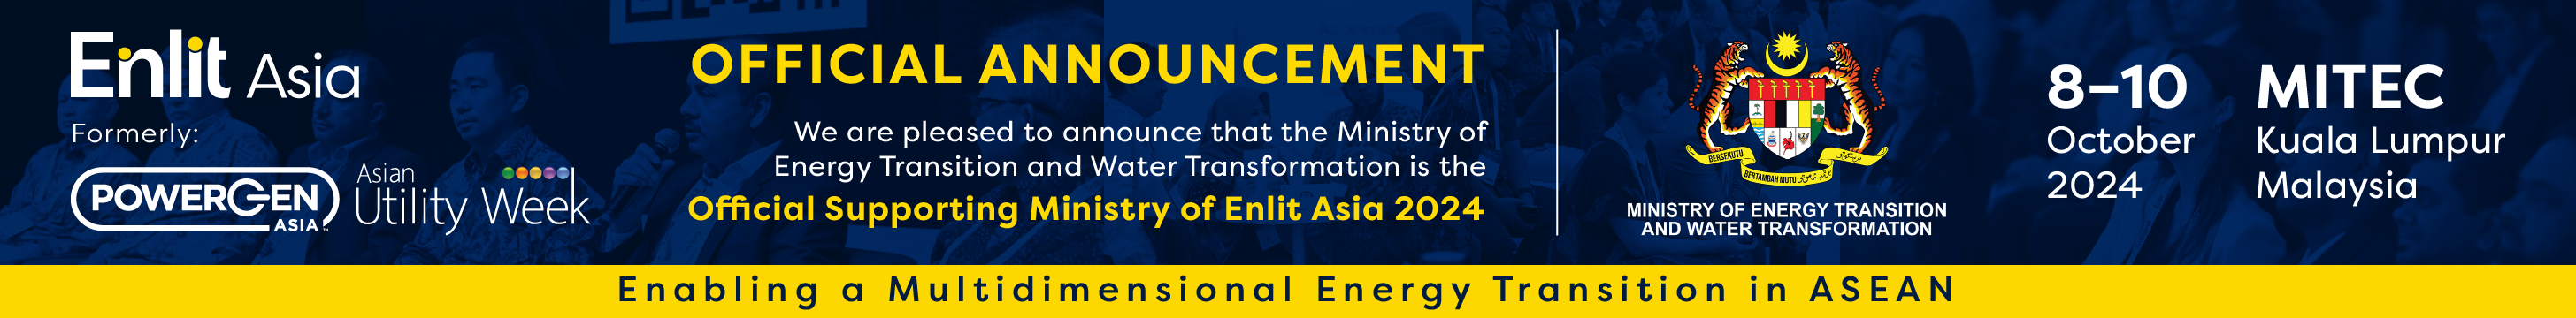 PETRA as supporting Ministry of Enlit Asia 2024